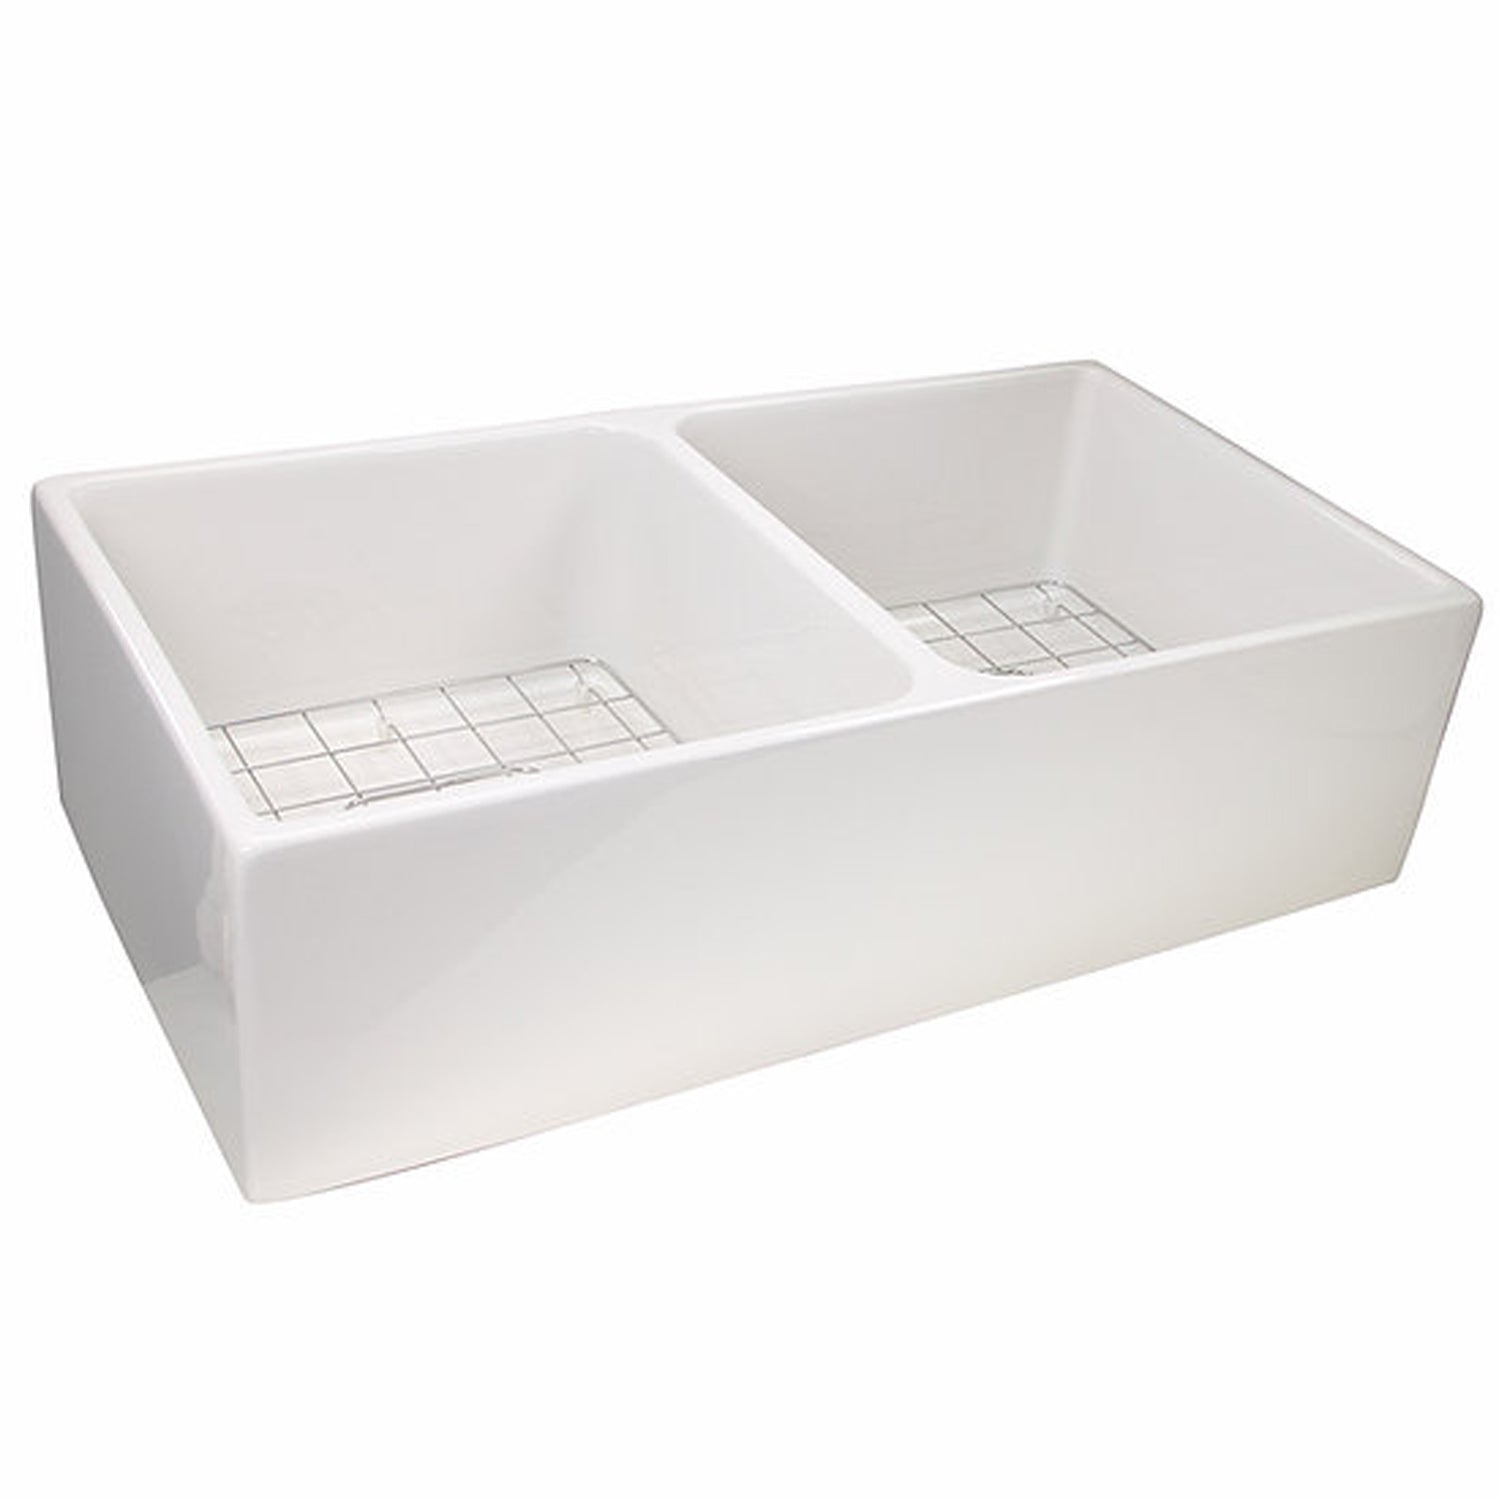 Nantucket Sinks 36" Double Bowl Farmhouse Fireclay Sink with Drains and Grids